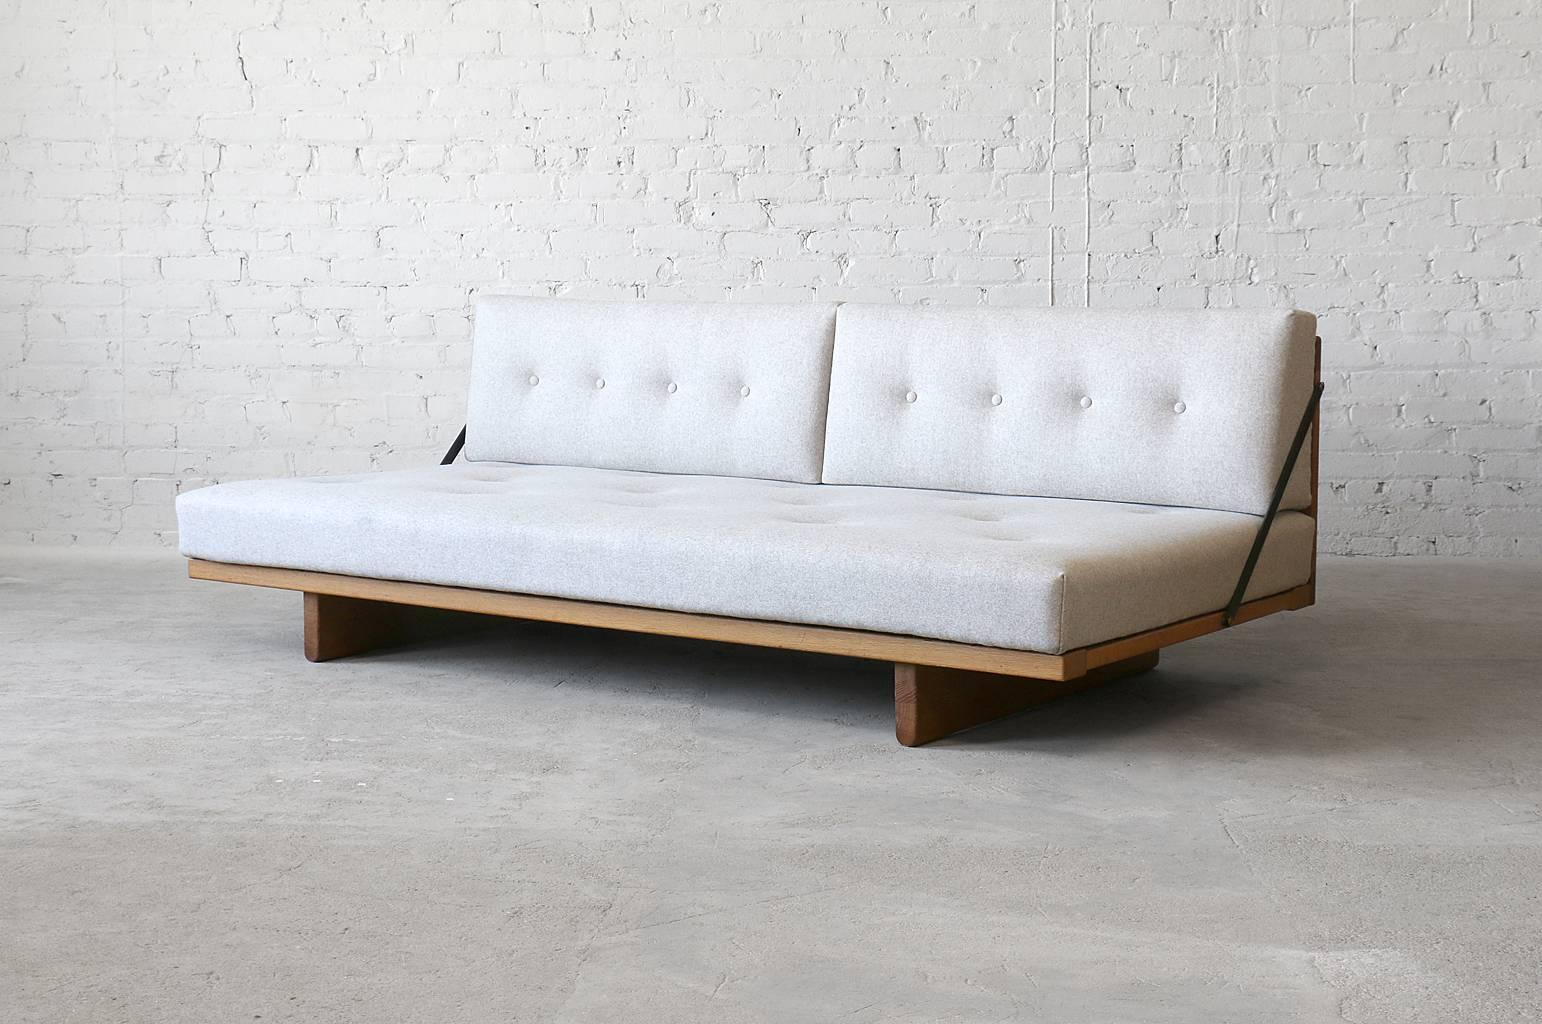 Model 192
Uncommon design
Solid oak frame
New Kvadrat Divina Melange wool.

A large #192 daybed by Børge Mogensen for Fredericia. The perfect piece for lounging! The daybed frame is constructed of solid white oak and the spring form cushions